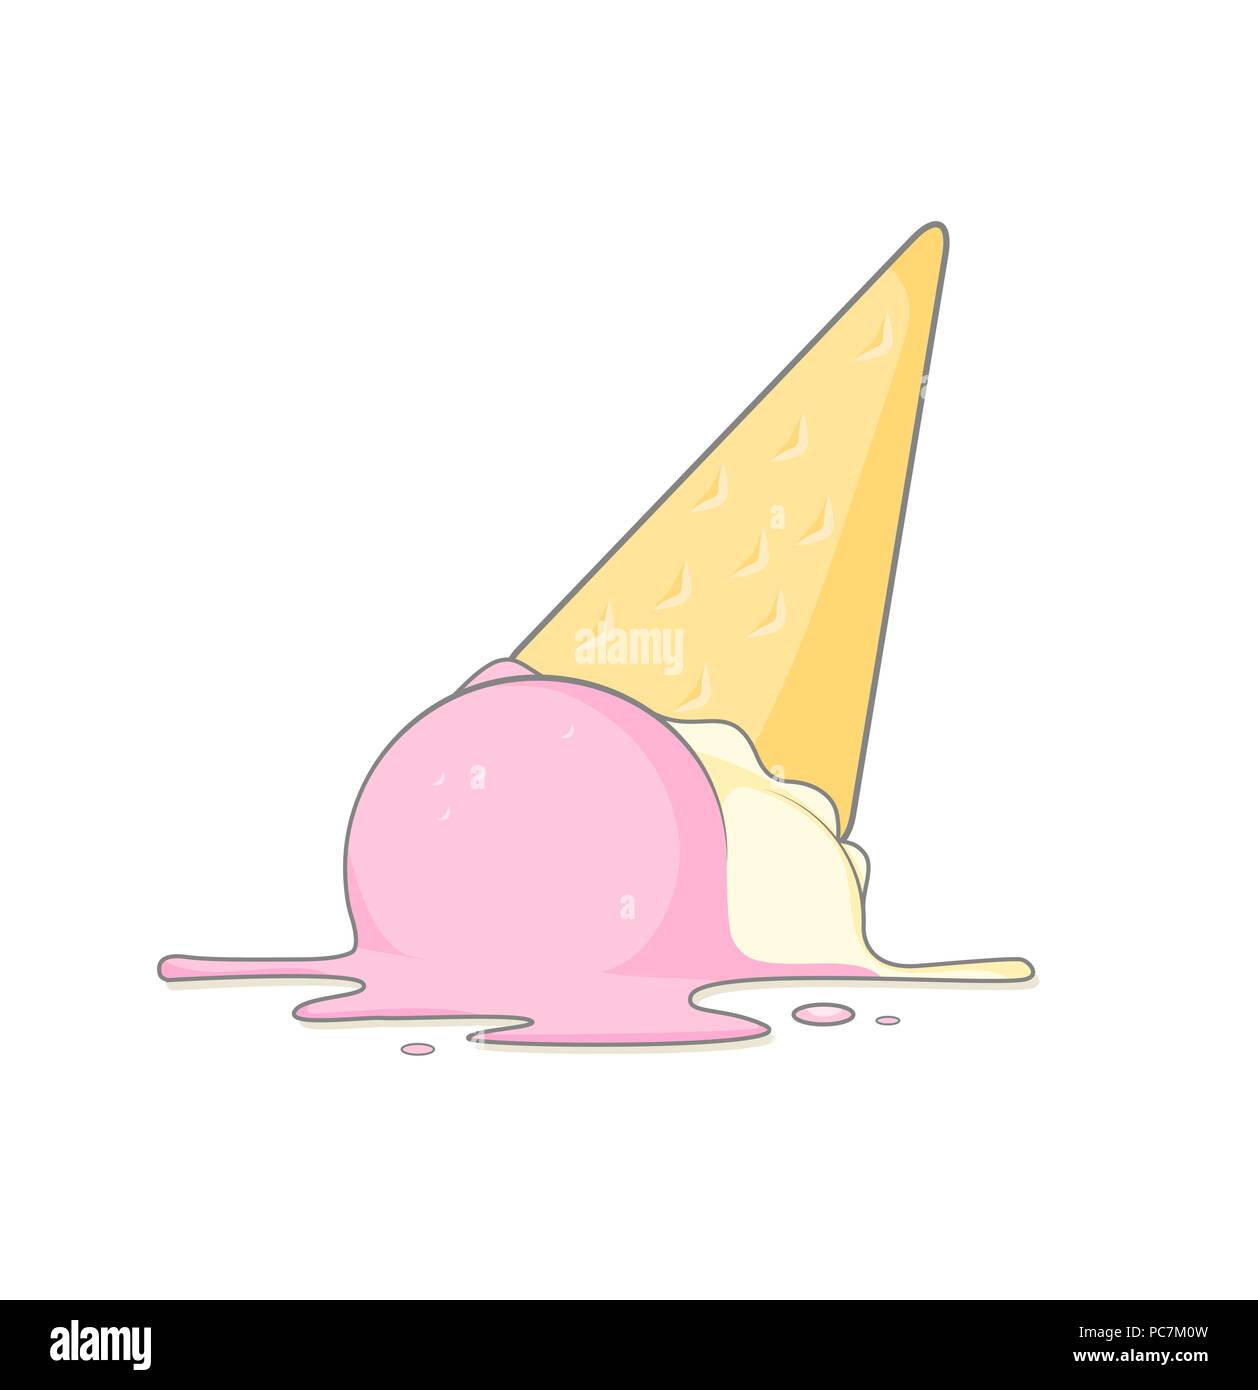 Oops strawberry ice cream fell down. Fallen sweets accident illustration clipart vector. Stock Vector